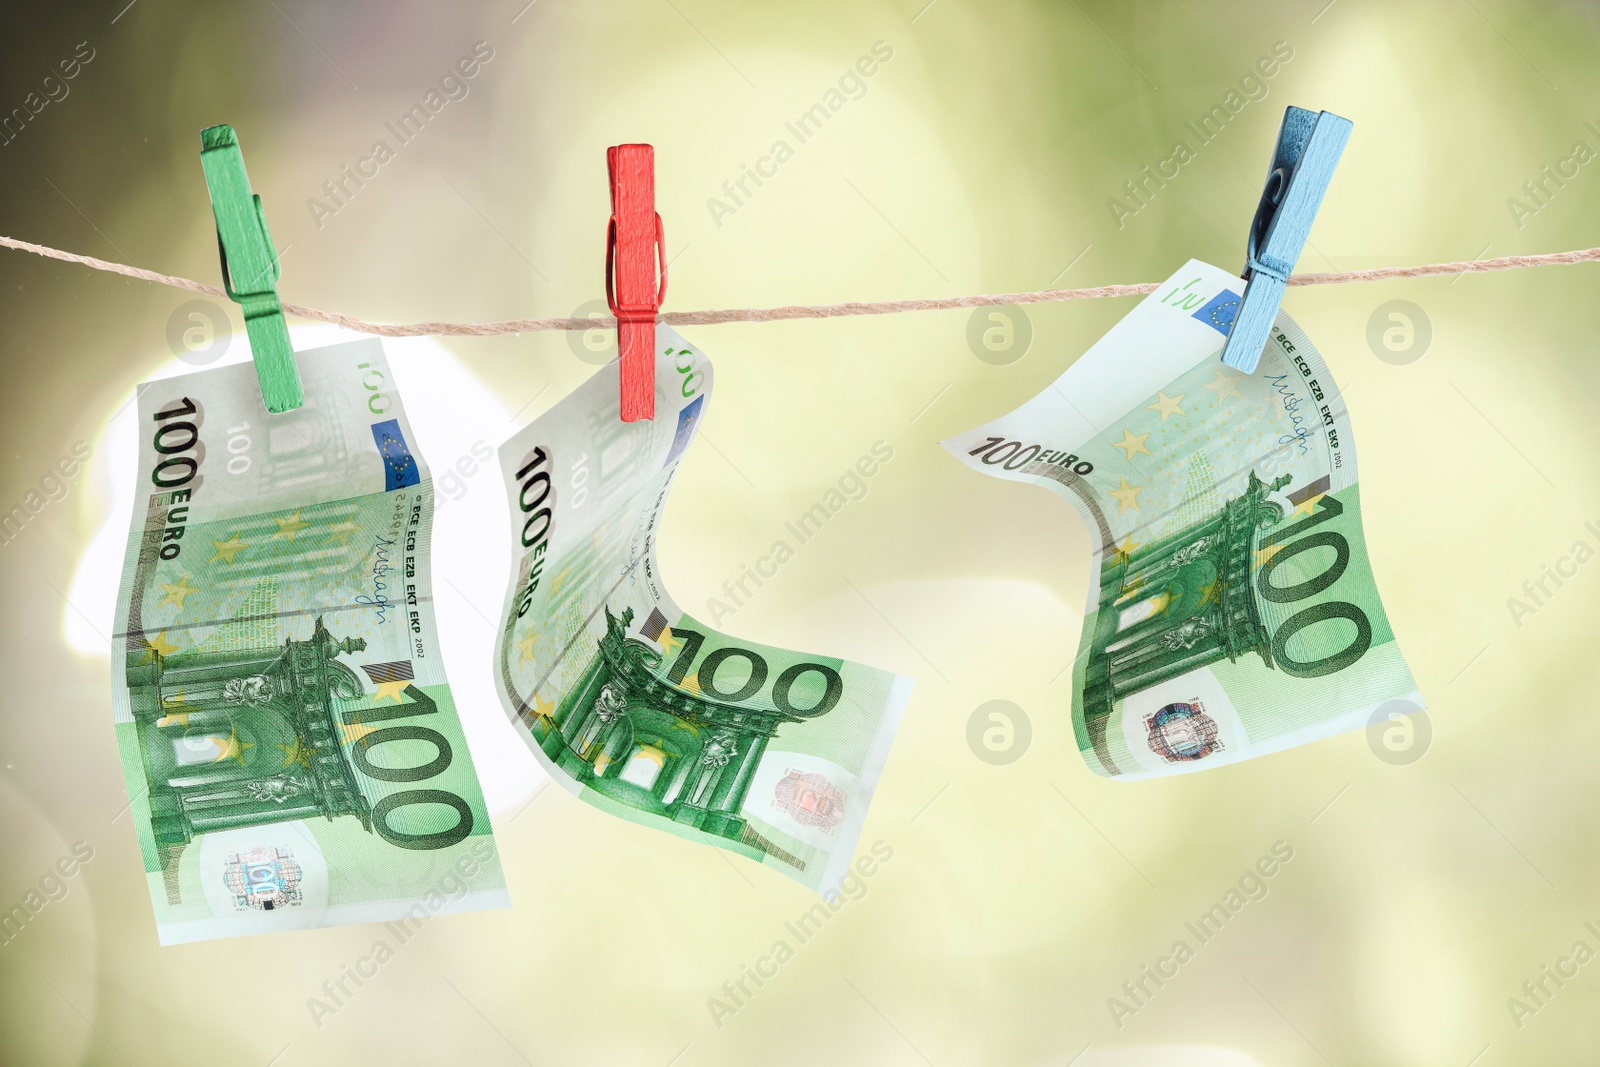 Image of Money laundering. Euro banknotes hanging on clothesline against blurred background